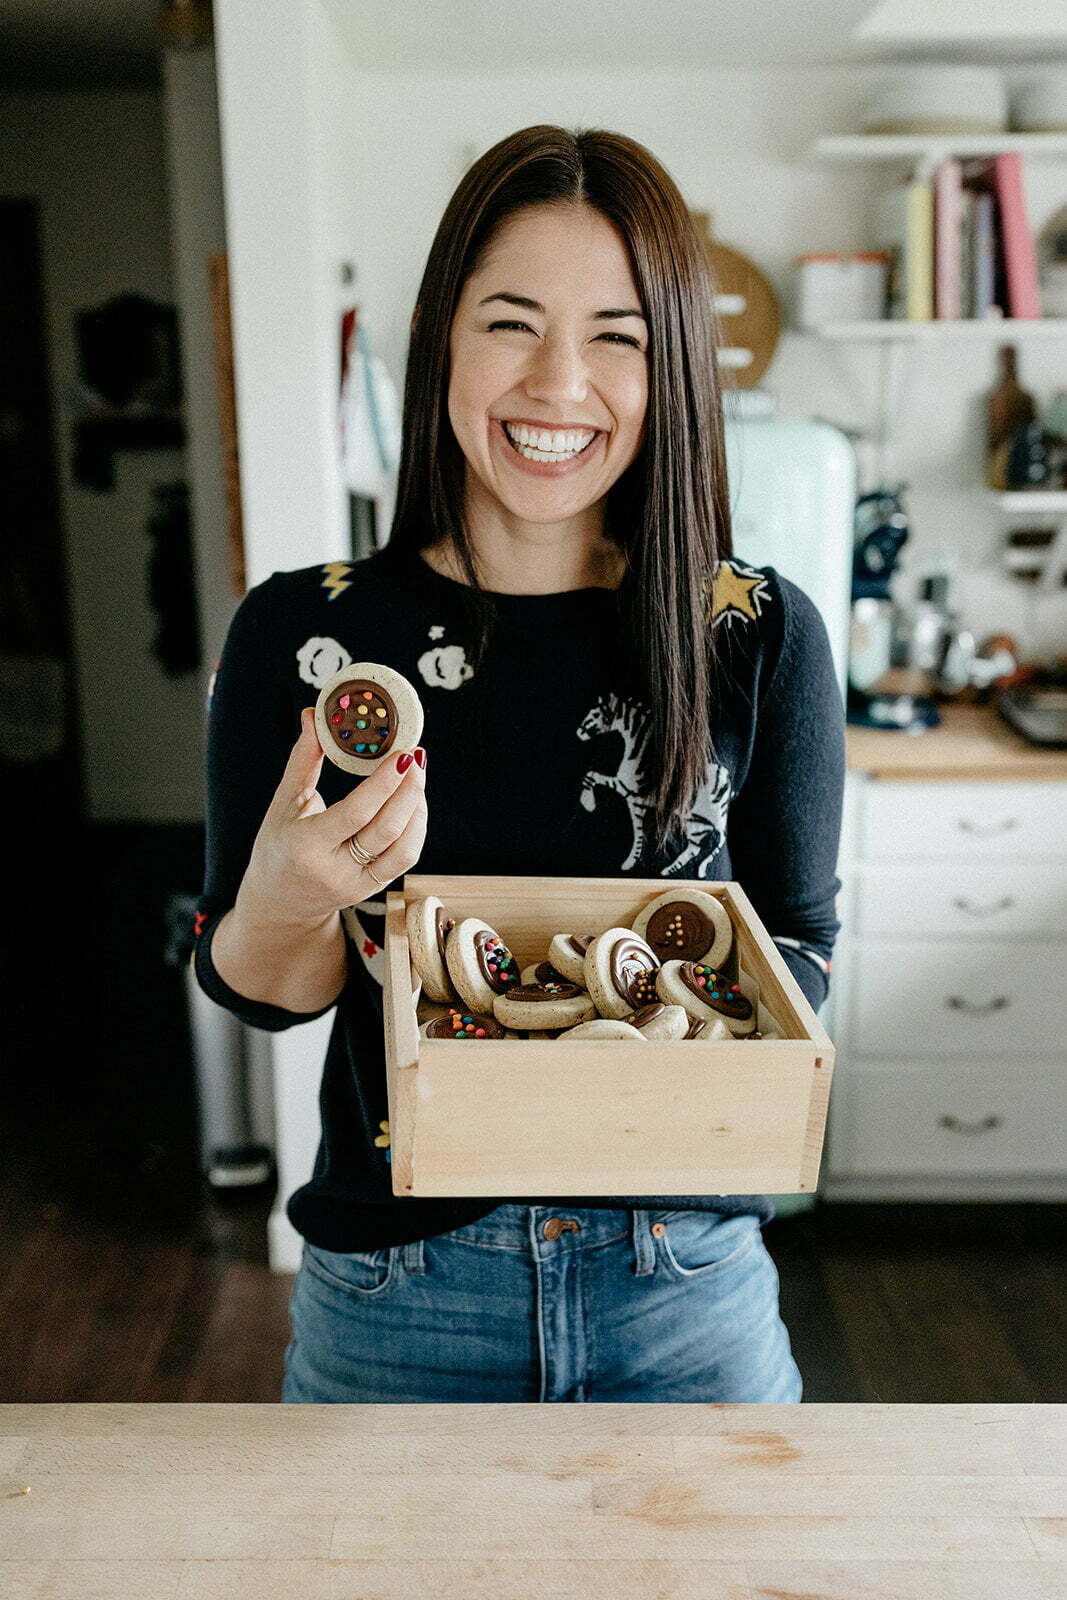 molly yeh book tour dates